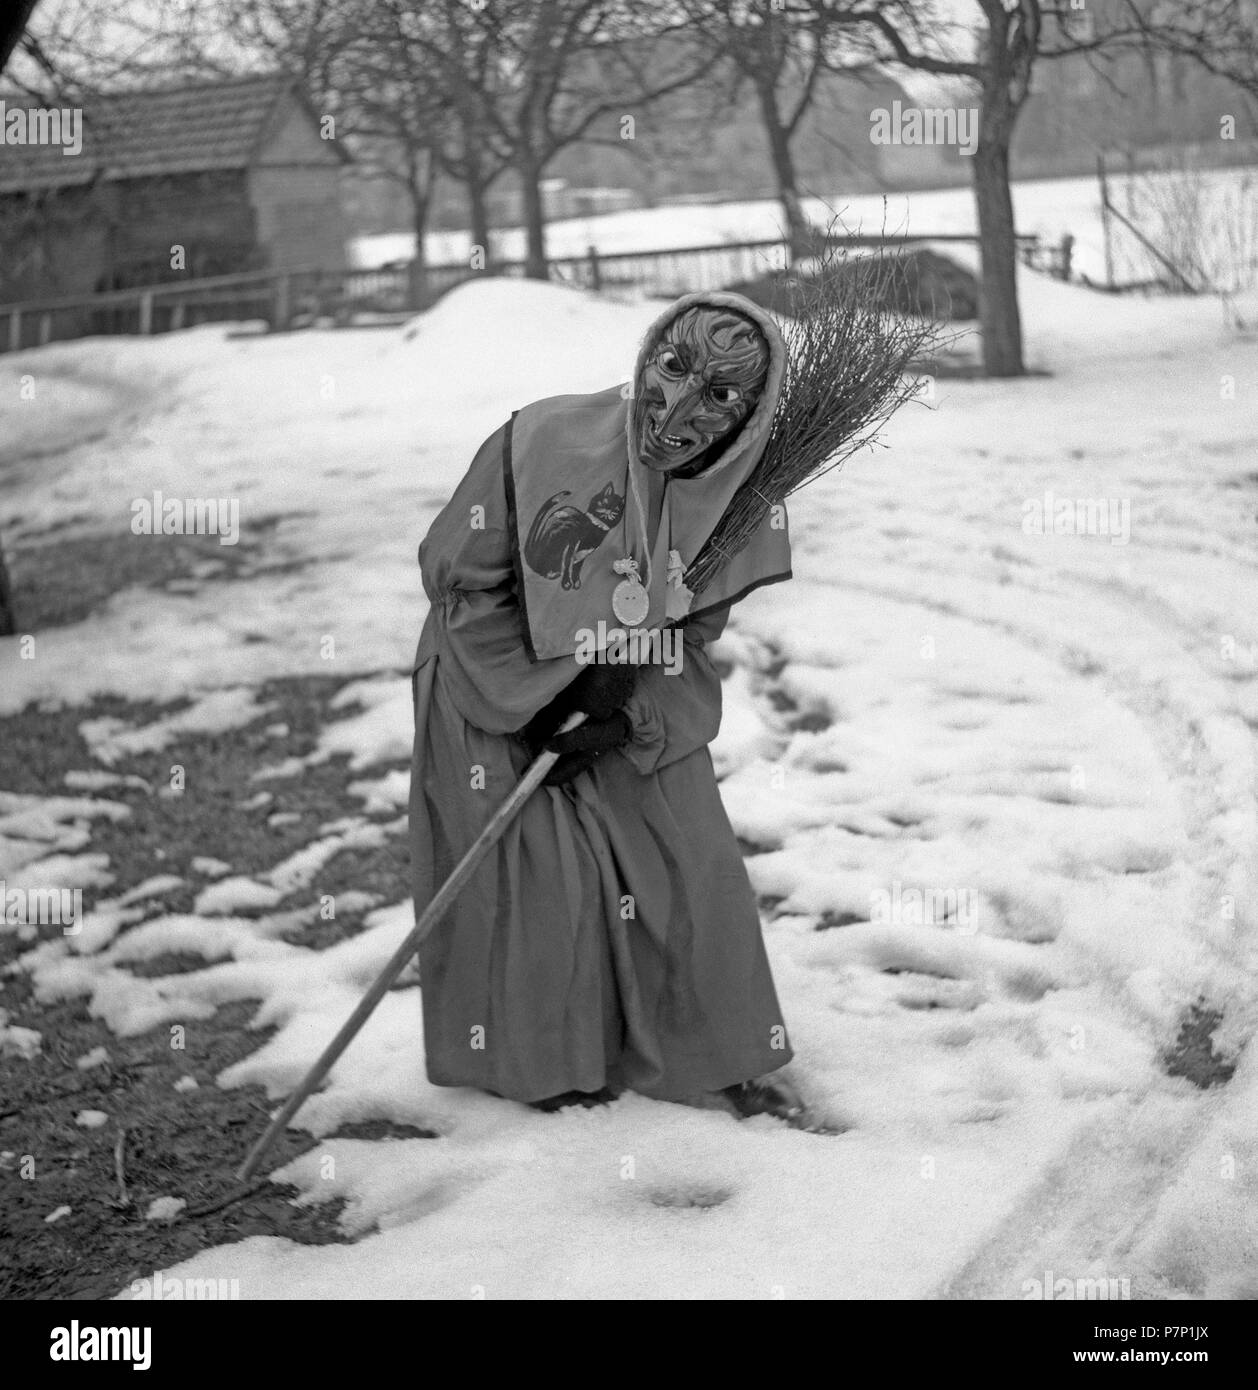 Witch with broom in hand stands in a curvilinear position in the snow, carnival, around 1950, near Freiburg, Germany Stock Photo